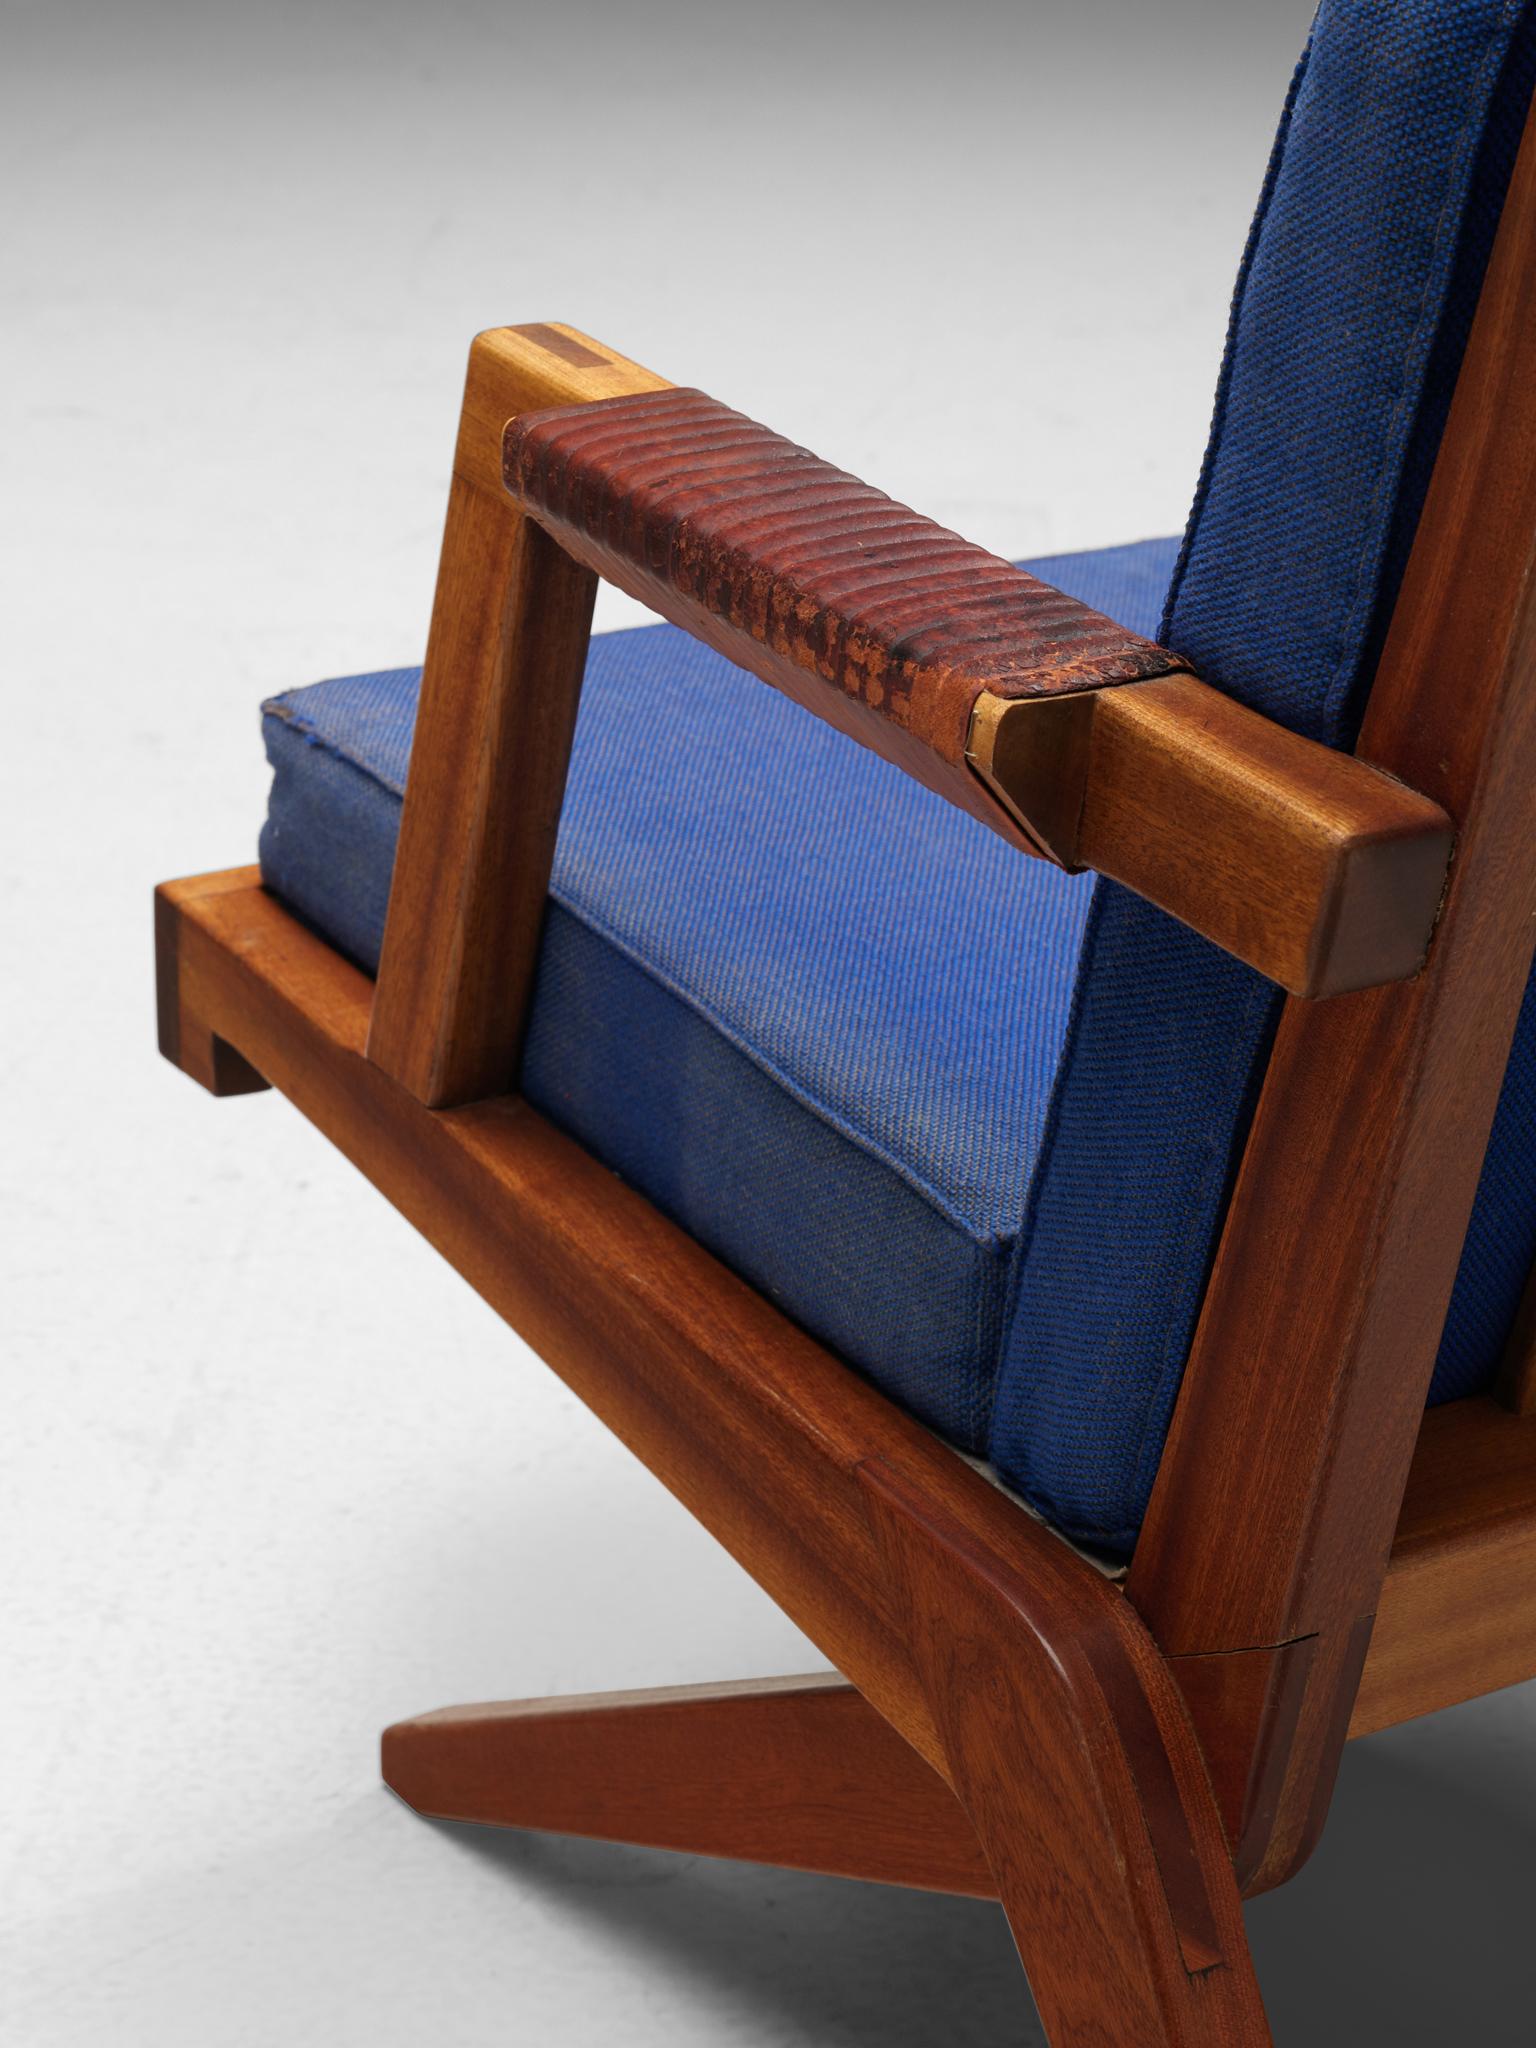 Fabric Olavi Hanninen Pair of 'Bumerang' Chairs with Kingsblue Upholstery